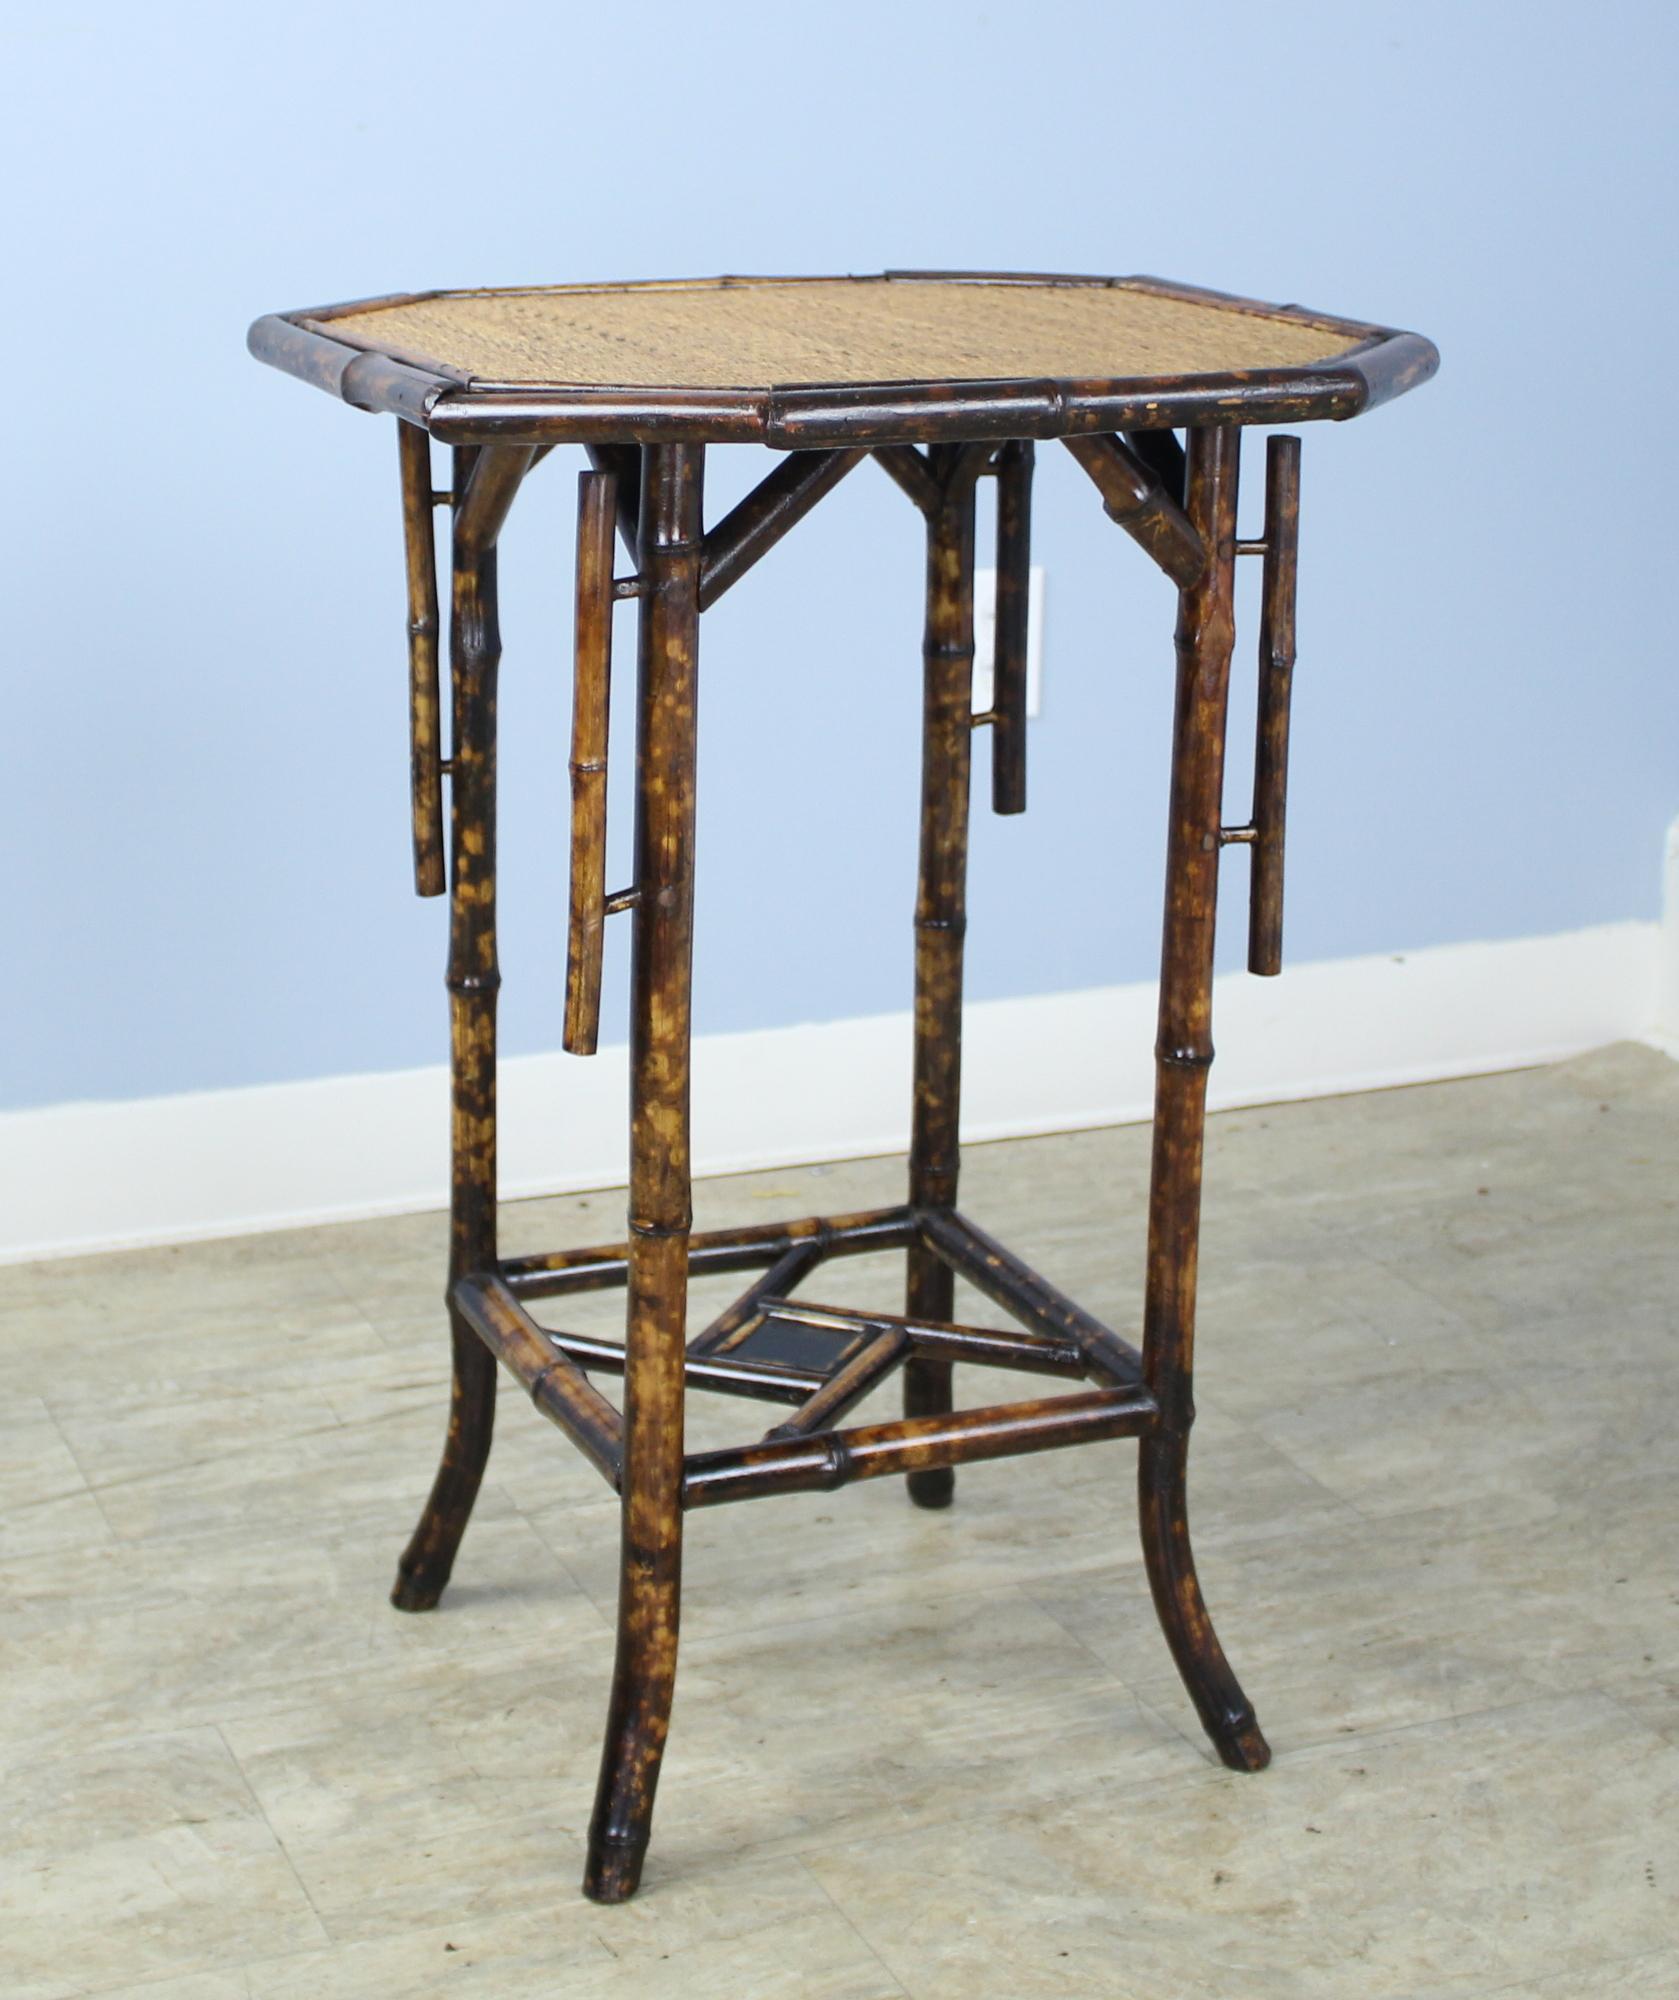 An antique English bamboo side table, with flared legs and with and an unusual octagonal top accented with vertical detail. The top shelf is made of tightly woven rattan that is in very good condition. The bottom has a stylish bamboo configuration.